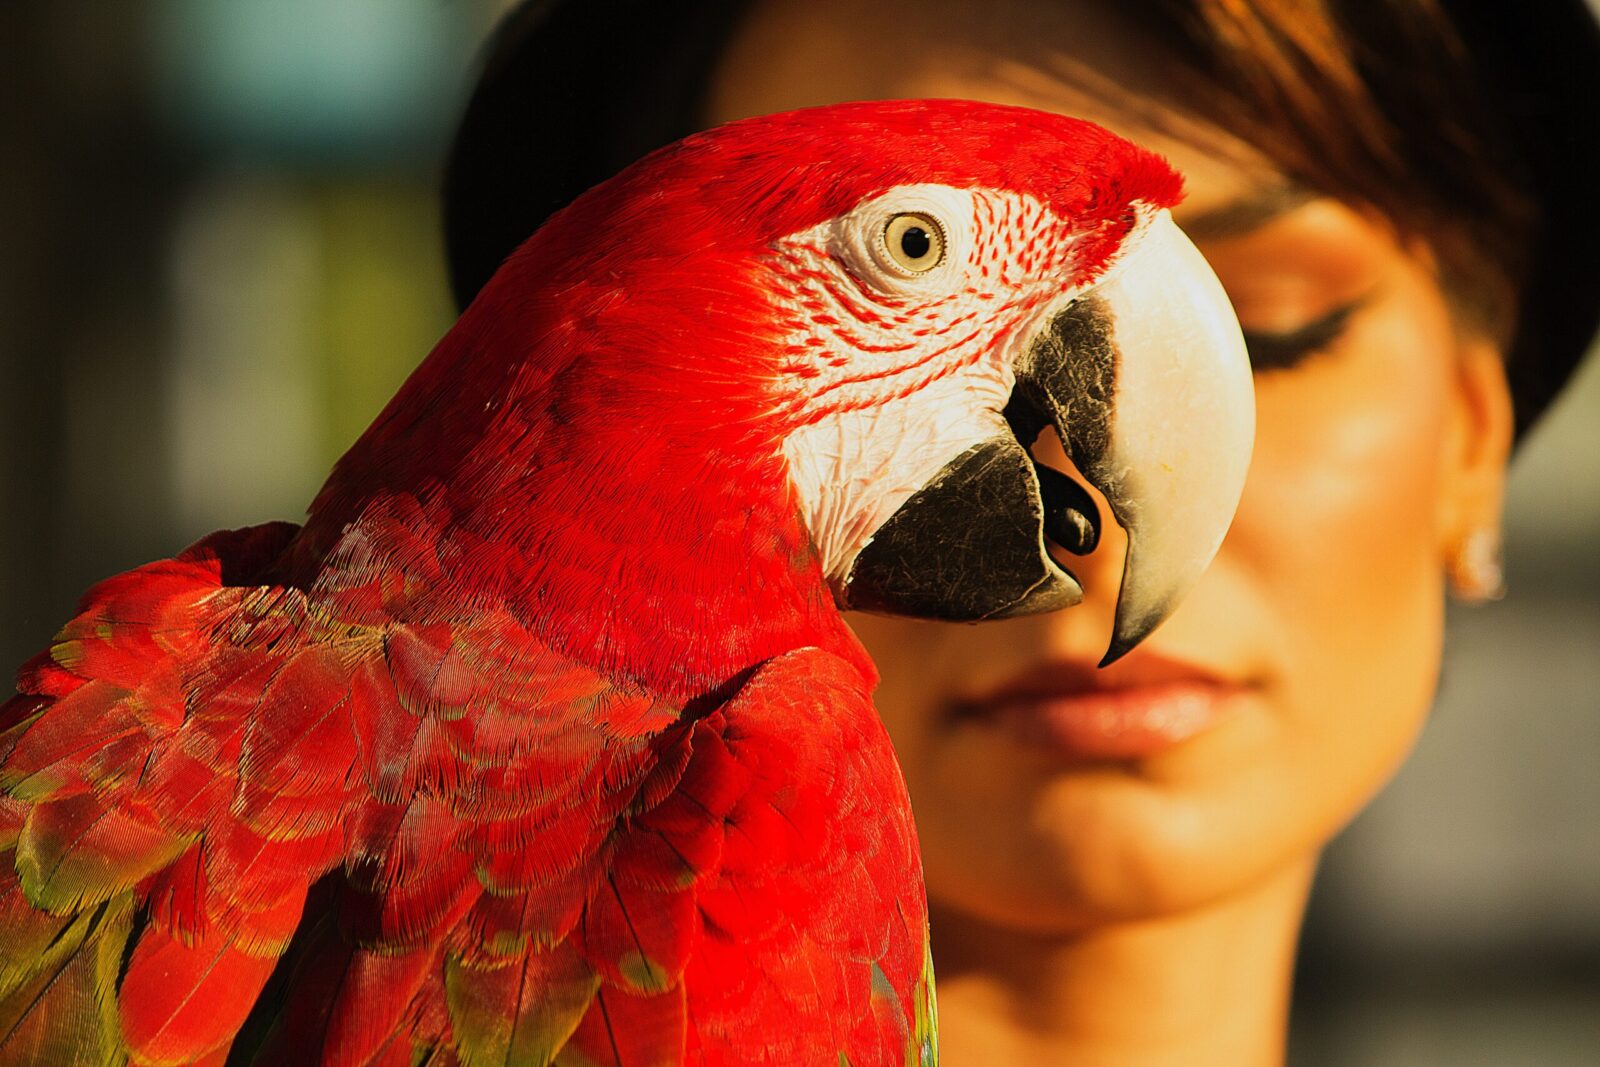 How Long Does A Parrot Live?